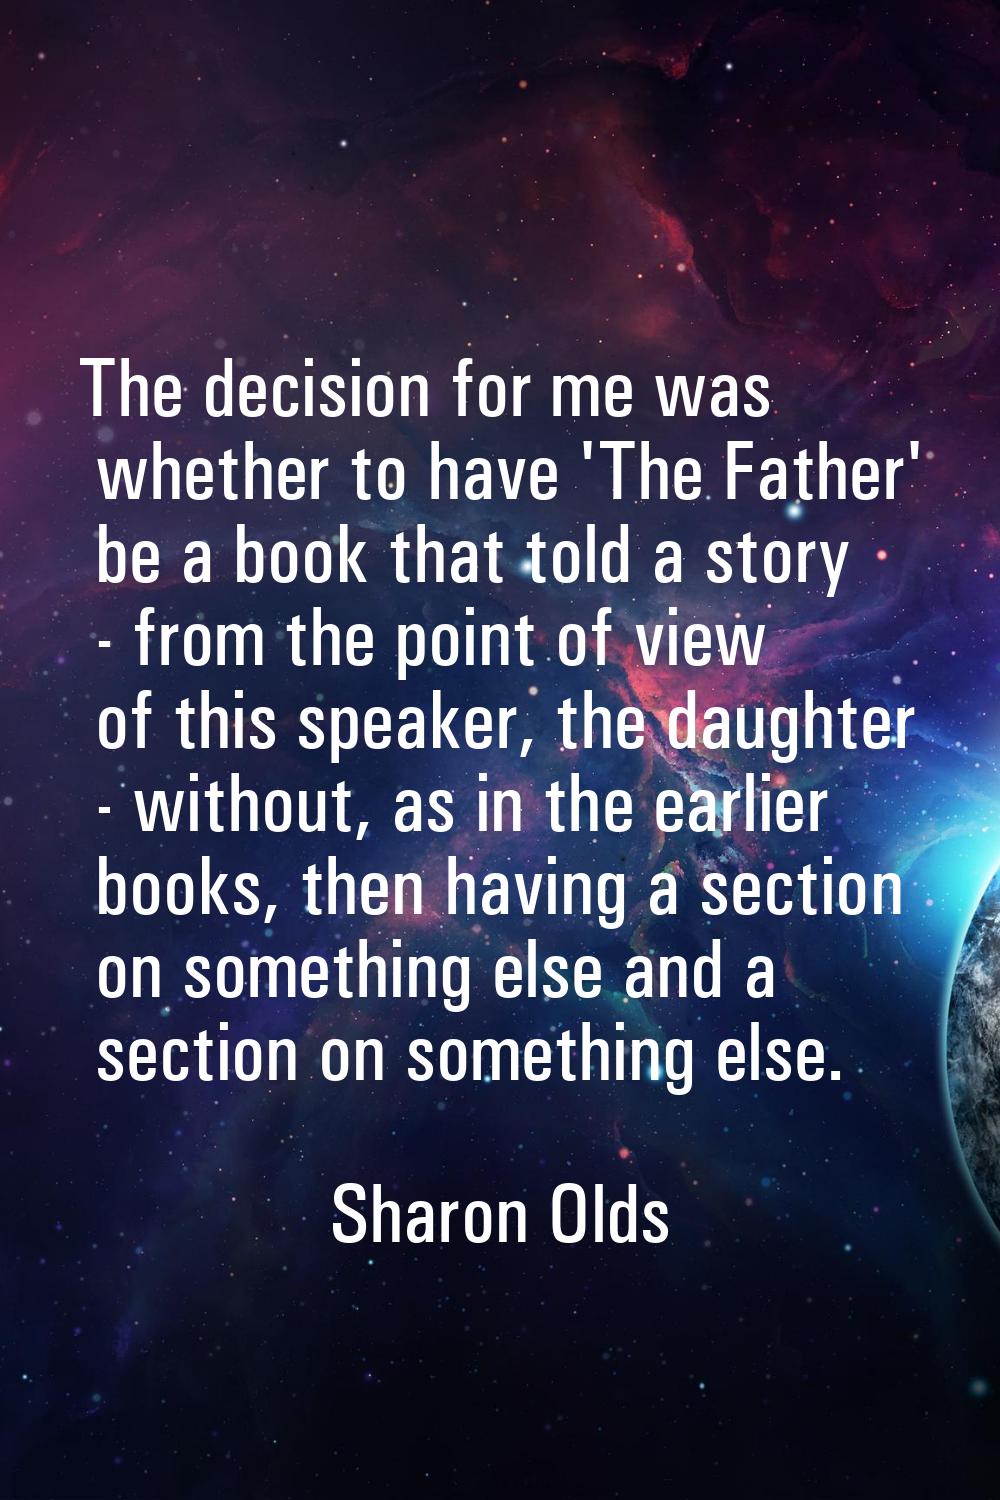 The decision for me was whether to have 'The Father' be a book that told a story - from the point o